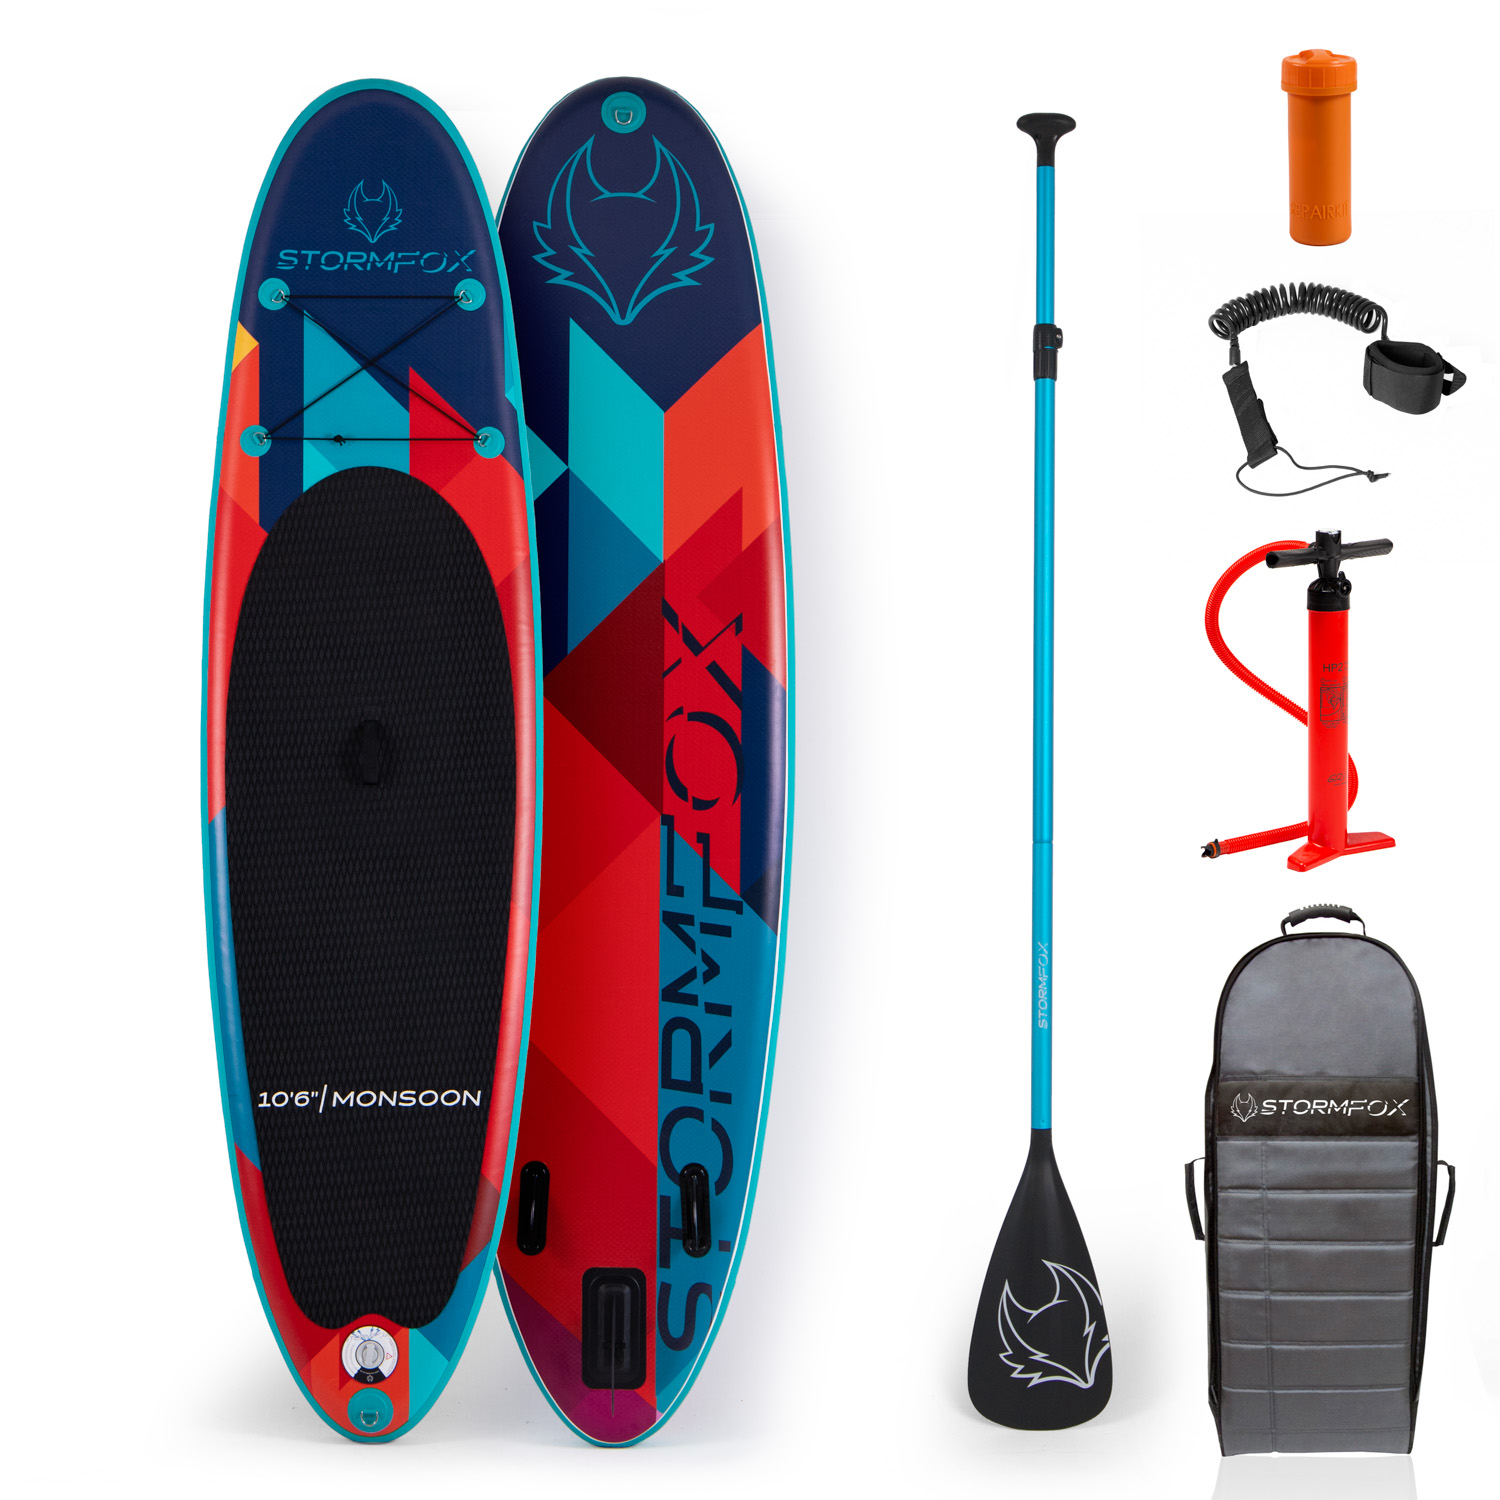 Monsoon Stand Up Paddle Board Kit - 10' 6